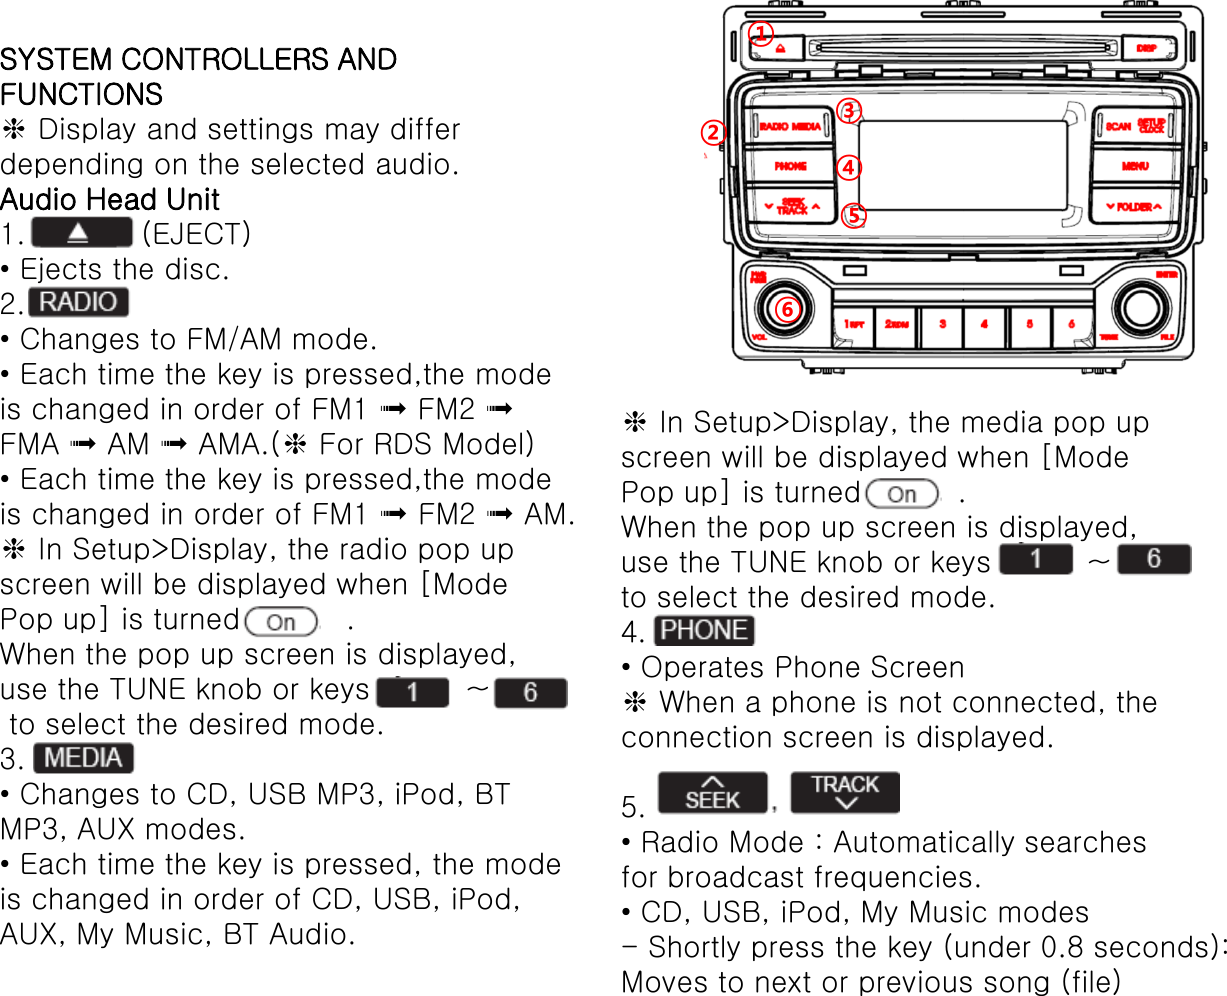 SYSTEM CONTROLLERS AND FUNCTIONS ❈ Display and settings may differ depending on the selected audio. Audio Head Unit 1.            (EJECT) • Ejects the disc. 2. • Changes to FM/AM mode. • Each time the key is pressed,the mode is changed in order of FM1 ➟ FM2 ➟ FMA ➟ AM ➟ AMA.(❈ For RDS Model) • Each time the key is pressed,the mode is changed in order of FM1 ➟ FM2 ➟ AM. ❈ In Setup&gt;Display, the radio pop up screen will be displayed when [Mode Pop up] is turned           . When the pop up screen is displayed, use the TUNE knob or keys          ~   to select the desired mode. 3. • Changes to CD, USB MP3, iPod, BT MP3, AUX modes. • Each time the key is pressed, the mode is changed in order of CD, USB, iPod, AUX, My Music, BT Audio. ❈ In Setup&gt;Display, the media pop up screen will be displayed when [Mode Pop up] is turned          . When the pop up screen is displayed, use the TUNE knob or keys          ~   to select the desired mode. 4. • Operates Phone Screen ❈ When a phone is not connected, the connection screen is displayed.  5.  • Radio Mode : Automatically searches for broadcast frequencies. • CD, USB, iPod, My Music modes - Shortly press the key (under 0.8 seconds): Moves to next or previous song (file) ① ② ③ ④ ⑤ ⑥ 